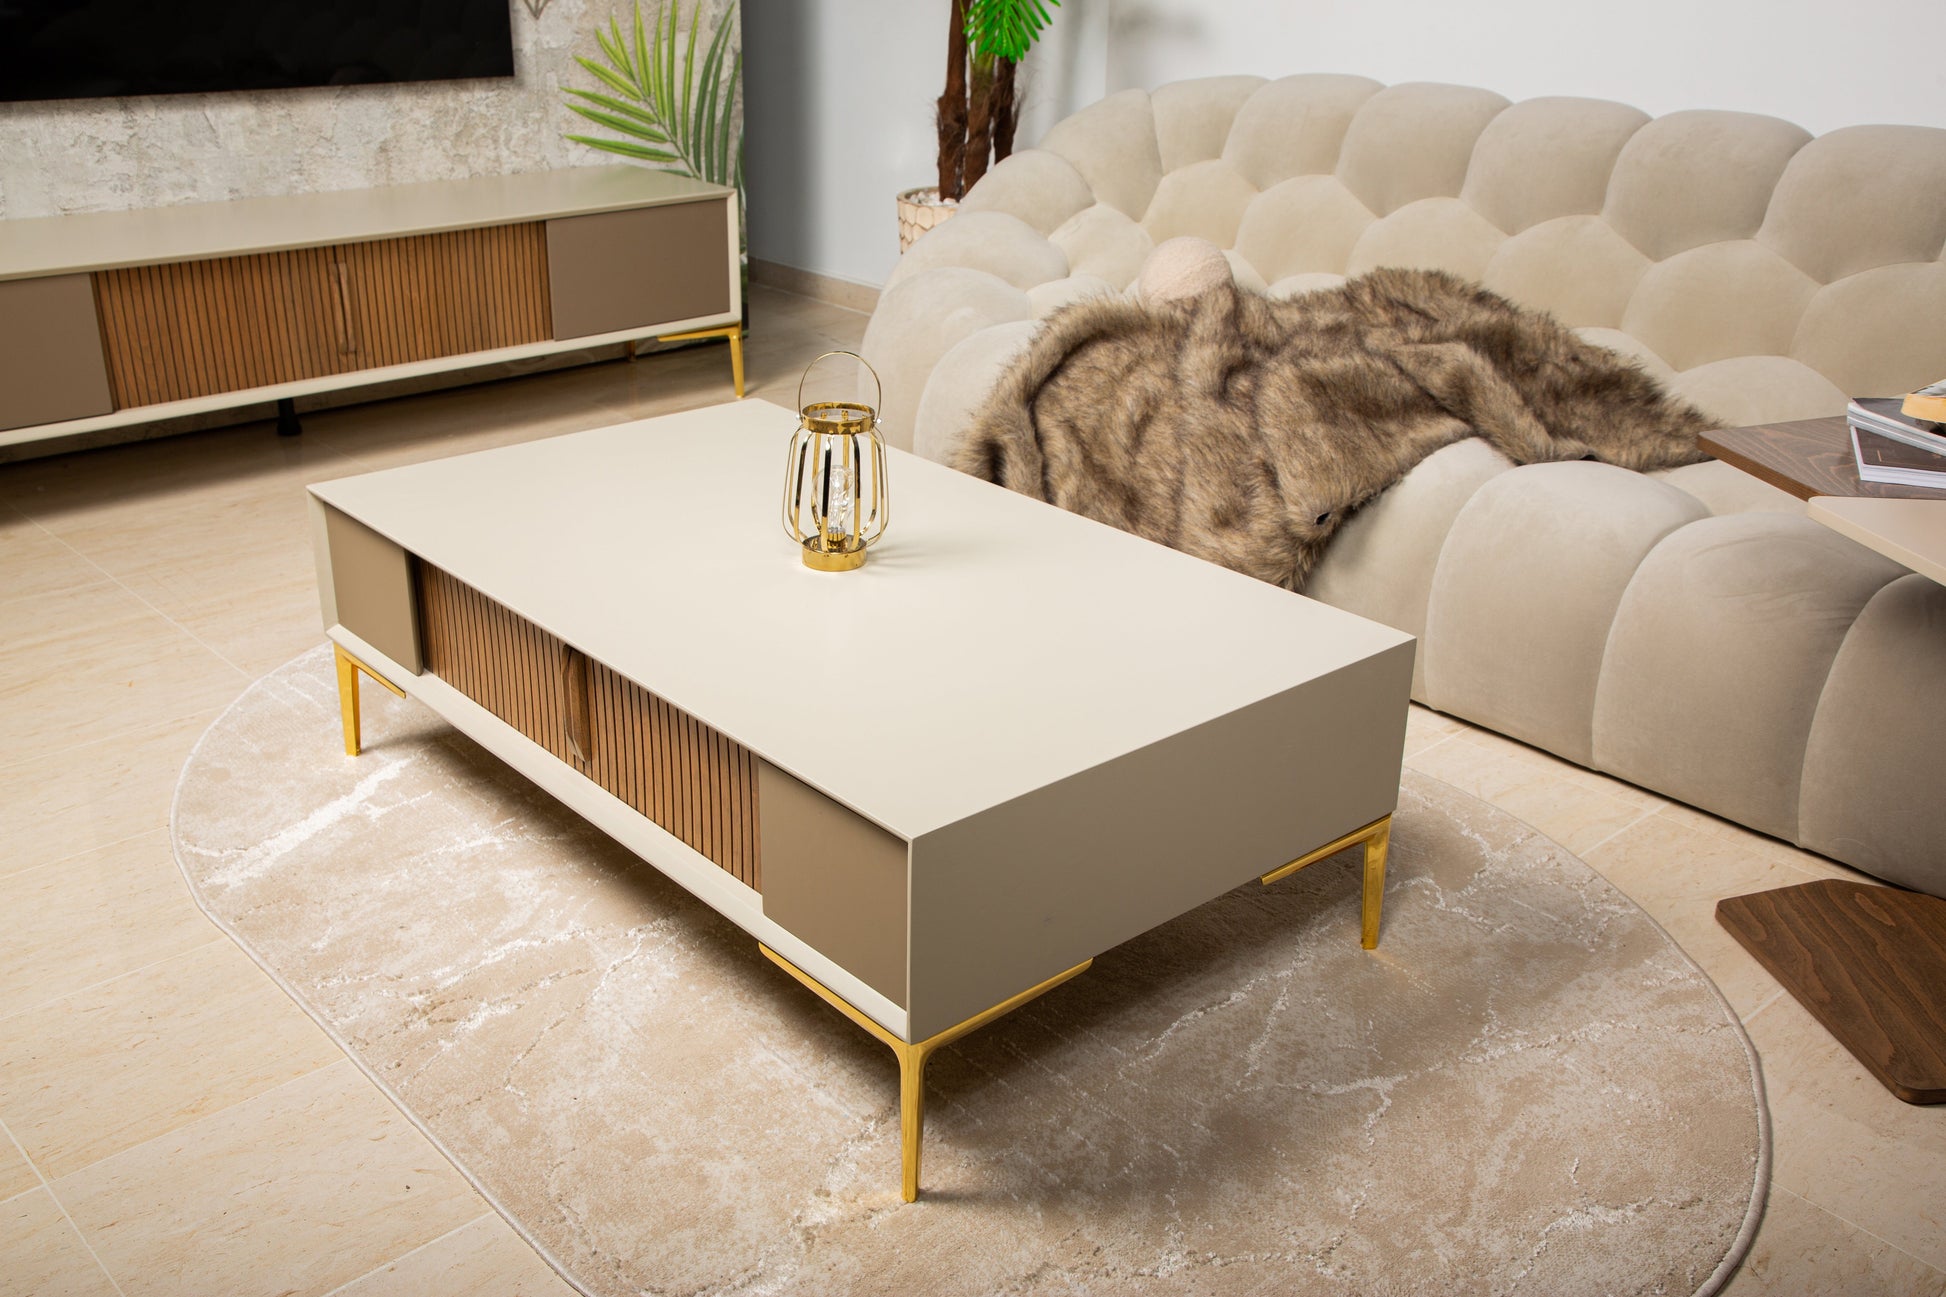 Set the Scene for Coffee, Cocktails & Conversation with Stylish Coffee Tables from like.furniture.